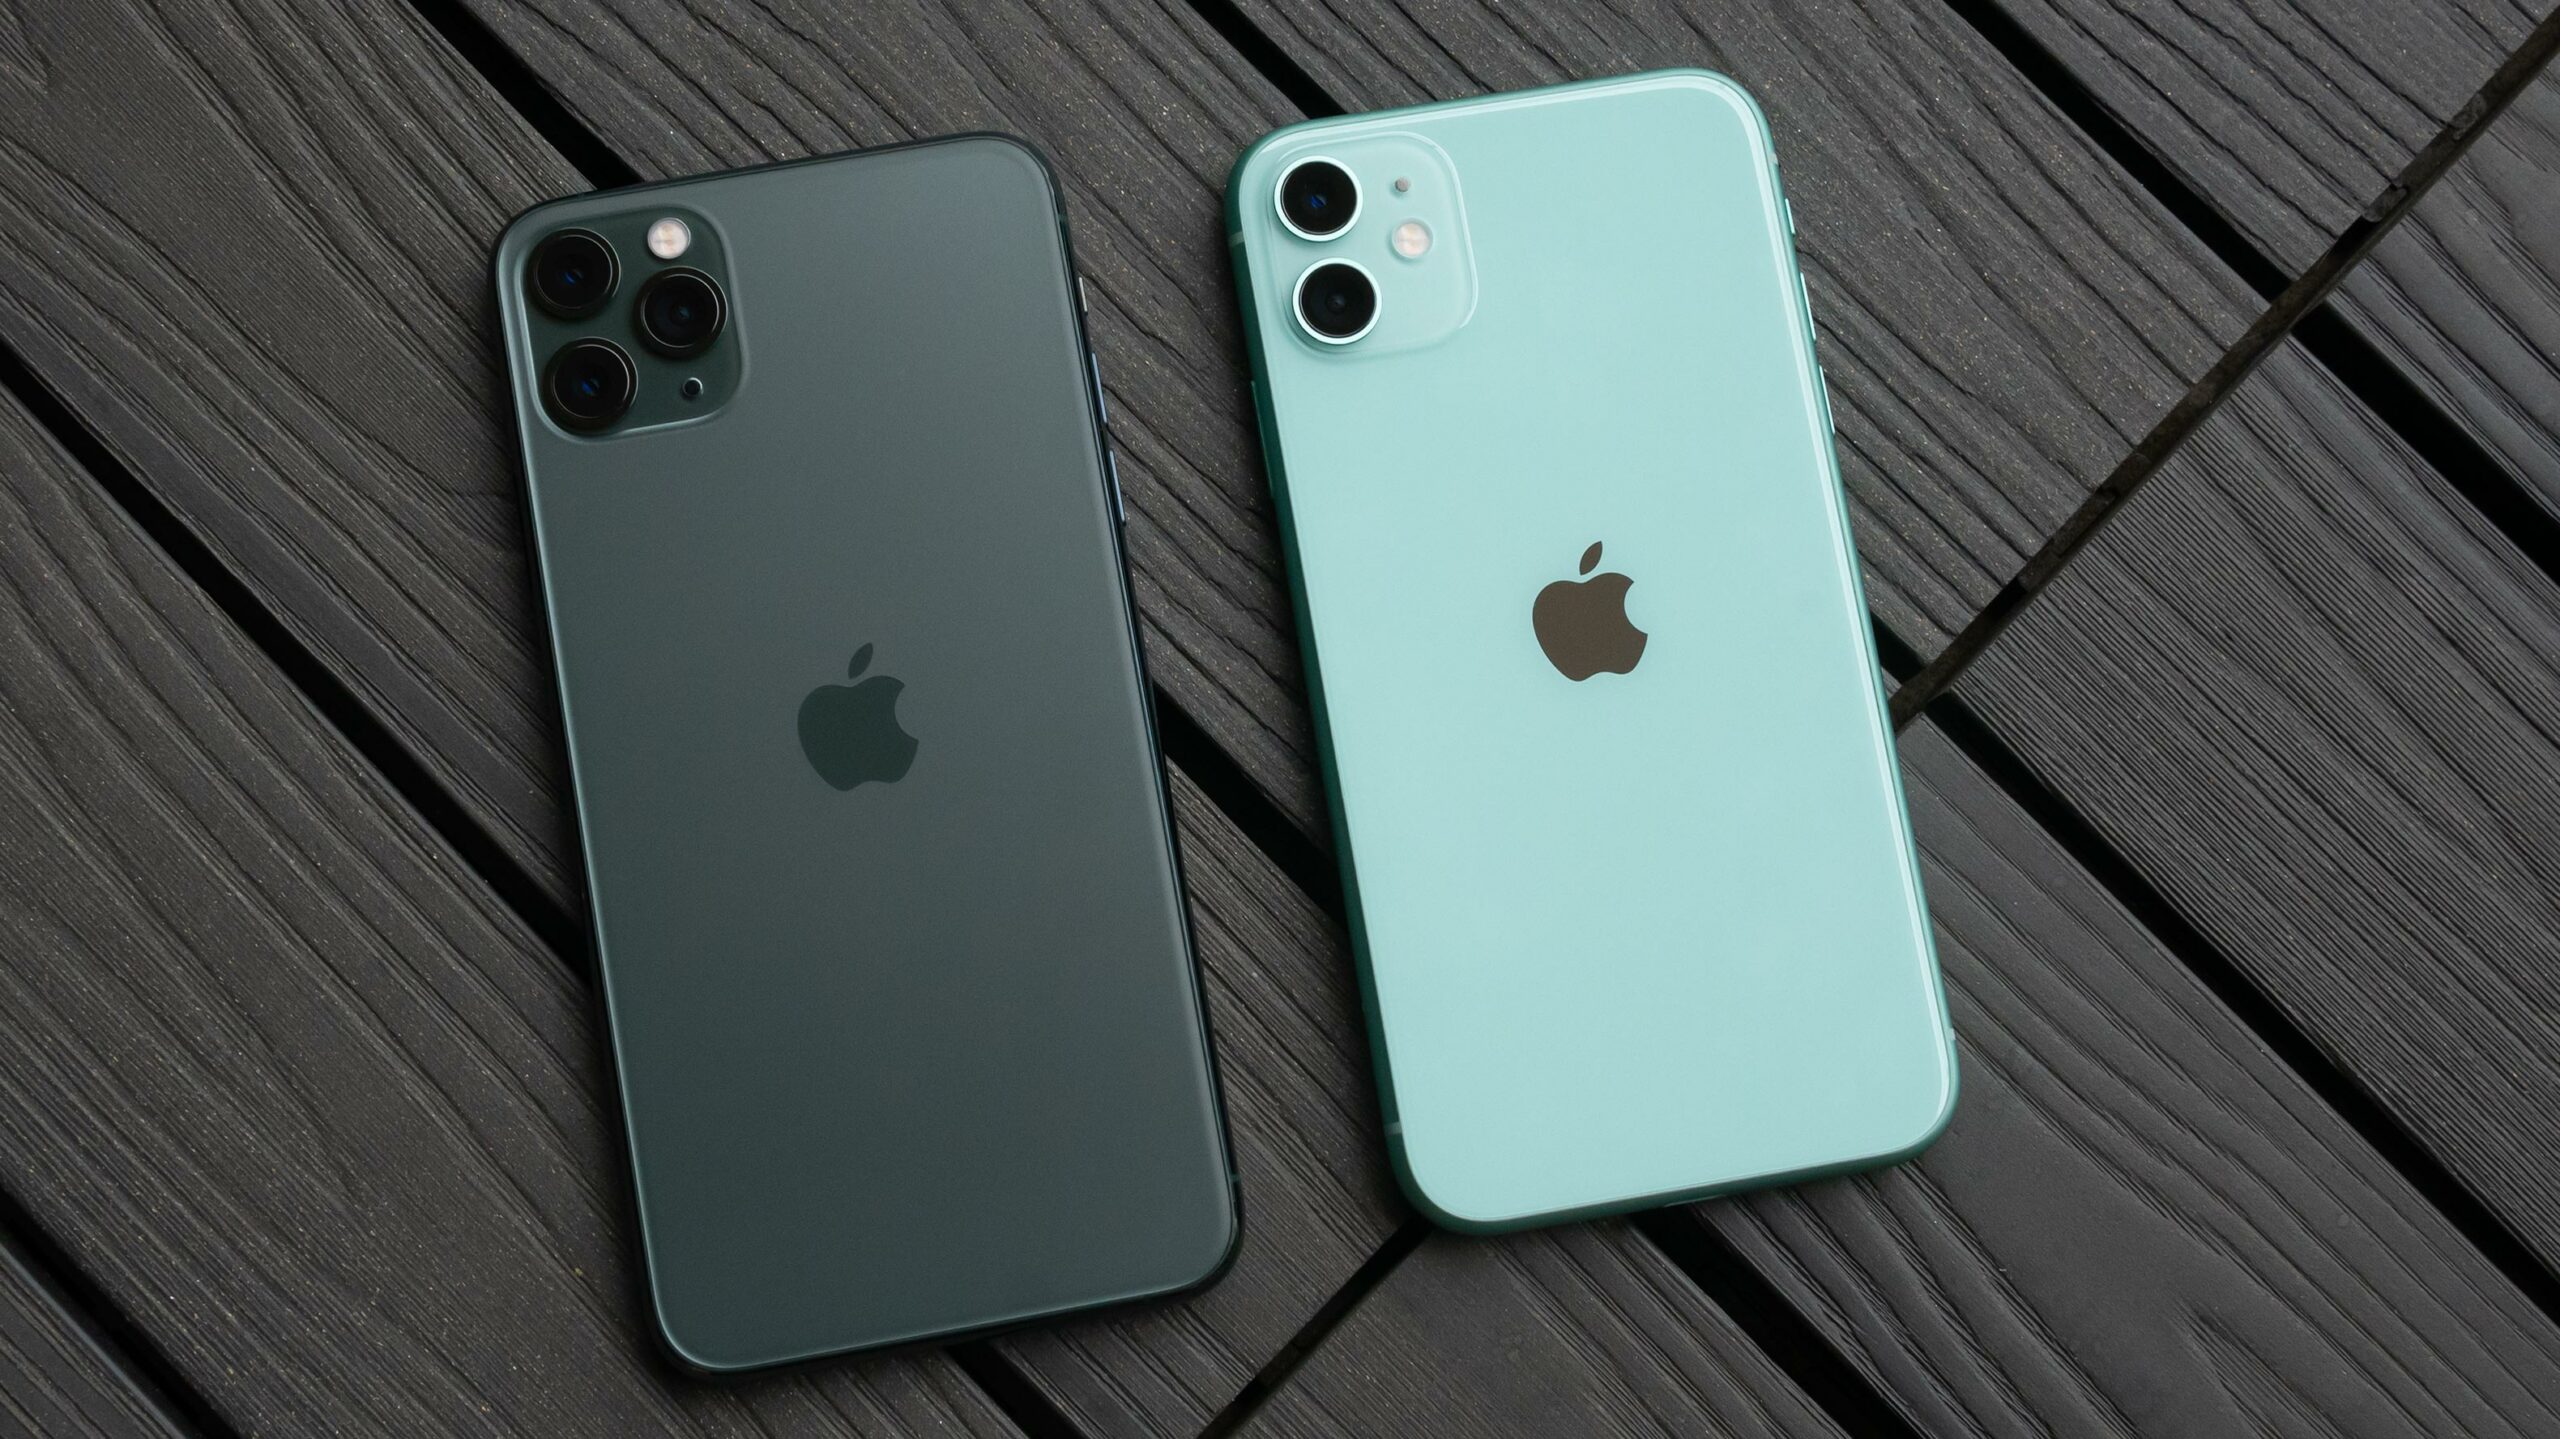 iPhone 11 and iPhone 11 Pro Max